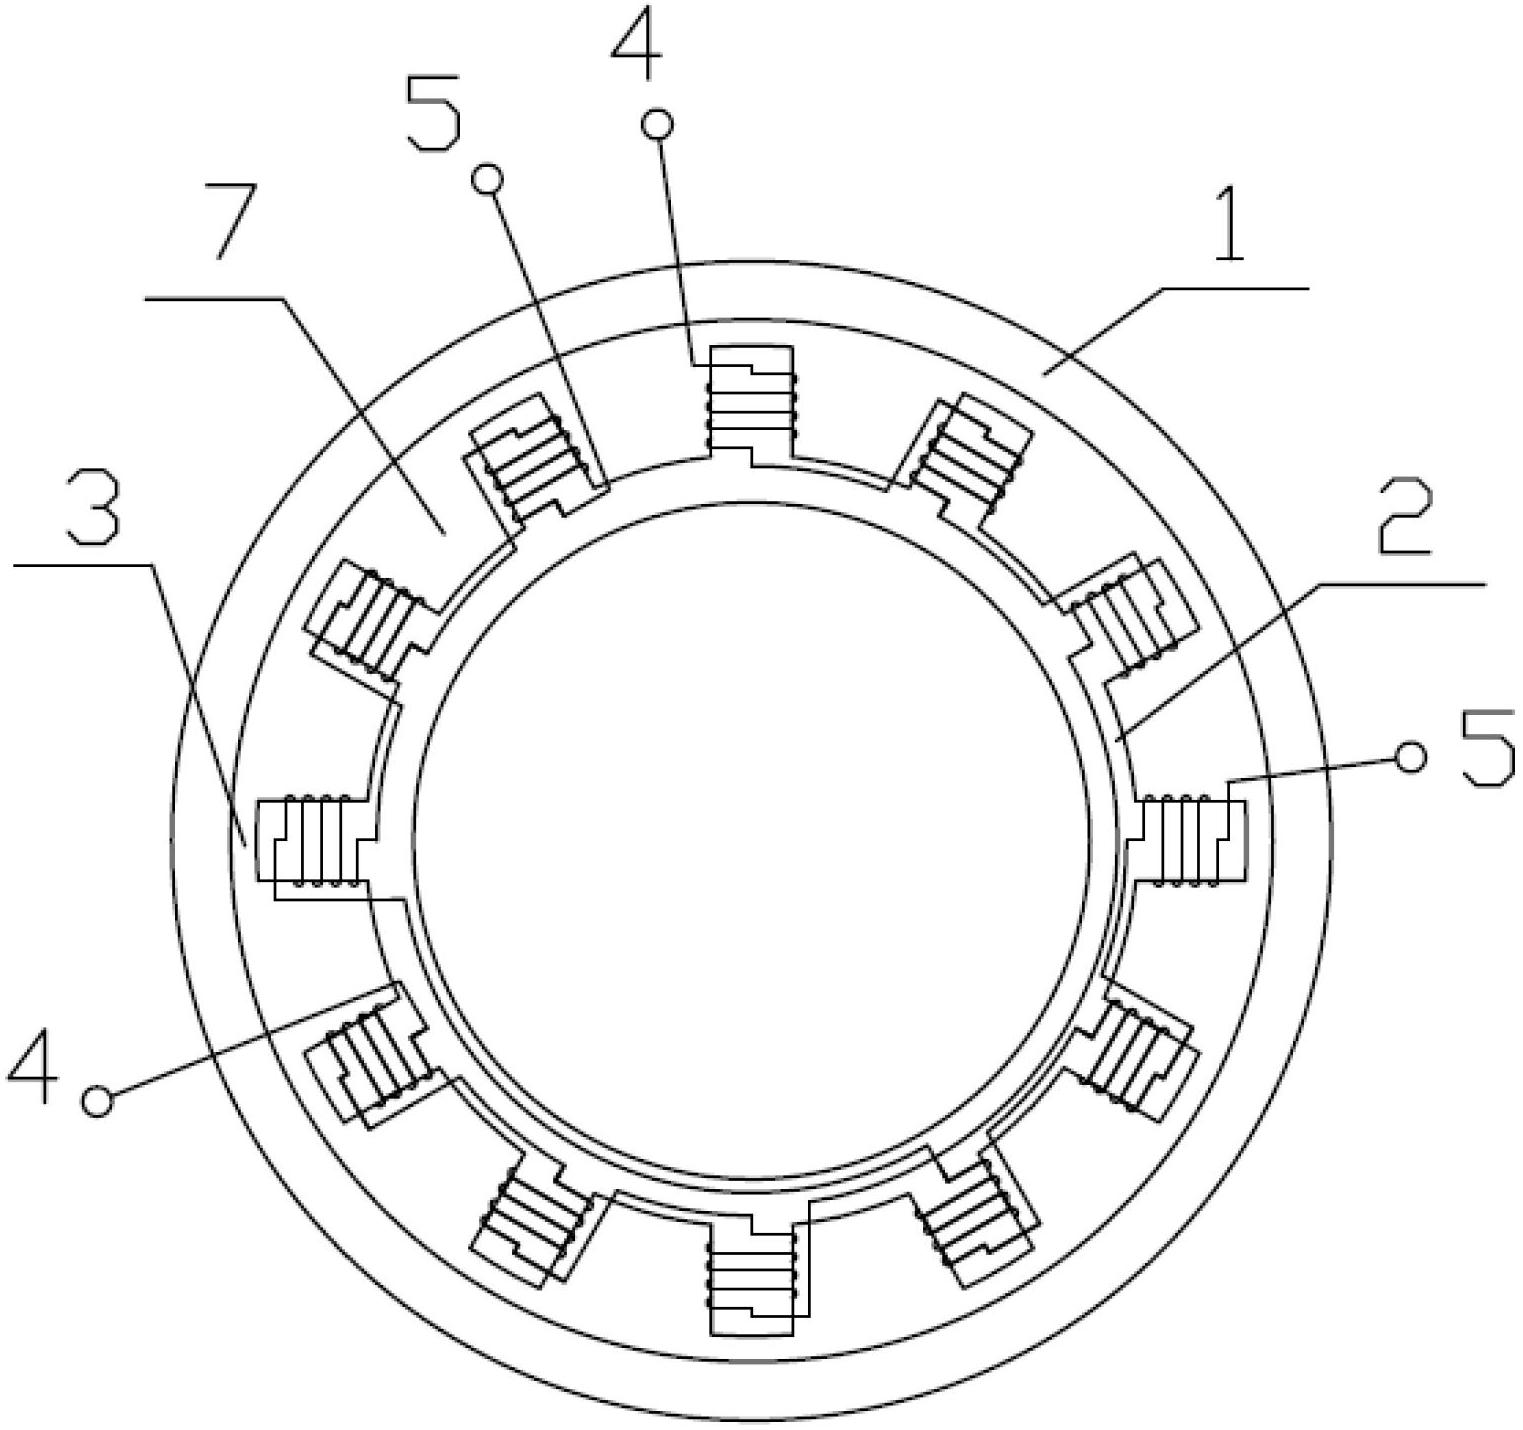 Outer rotor axial magnetic circuit reluctance type rotary transformer with multiple pairs of poles for space manipulator